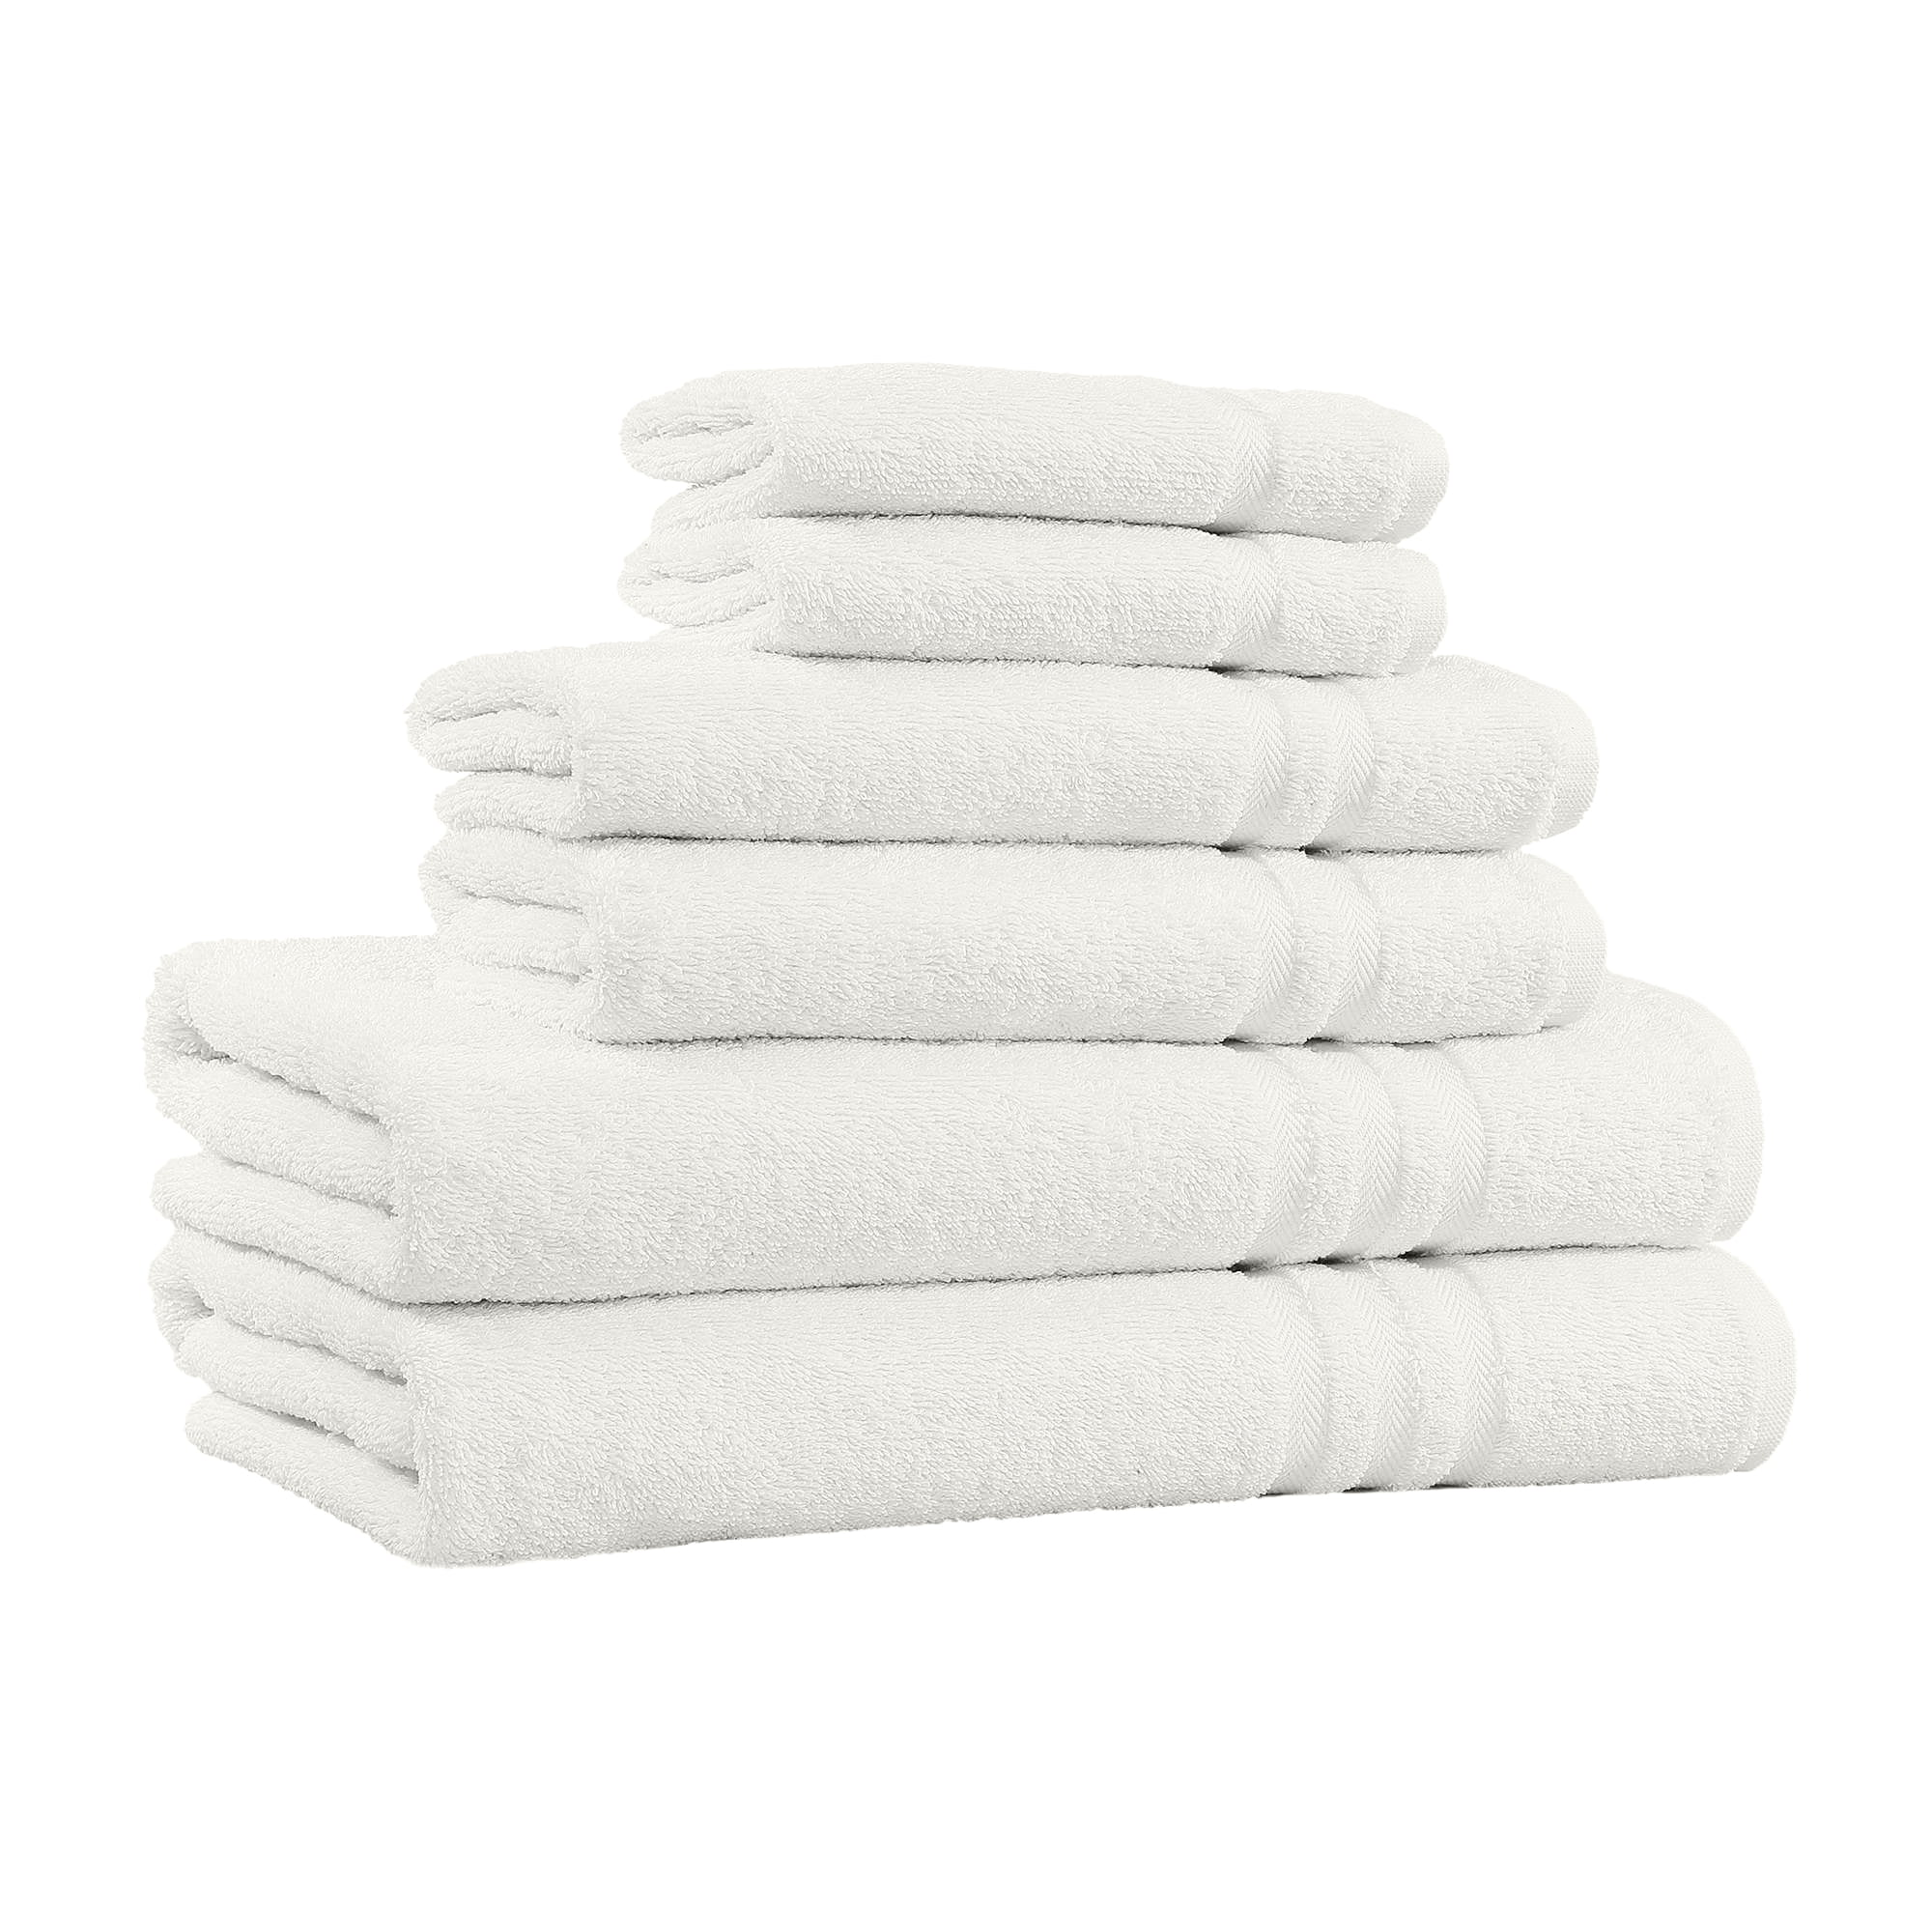 100% Cotton 650 GSM 6-Piece Bath Towel Sets - Highly Absorbent & Extra Soft  Quality Towels For Bathroom & Kitchen, Every Day Use - Beige